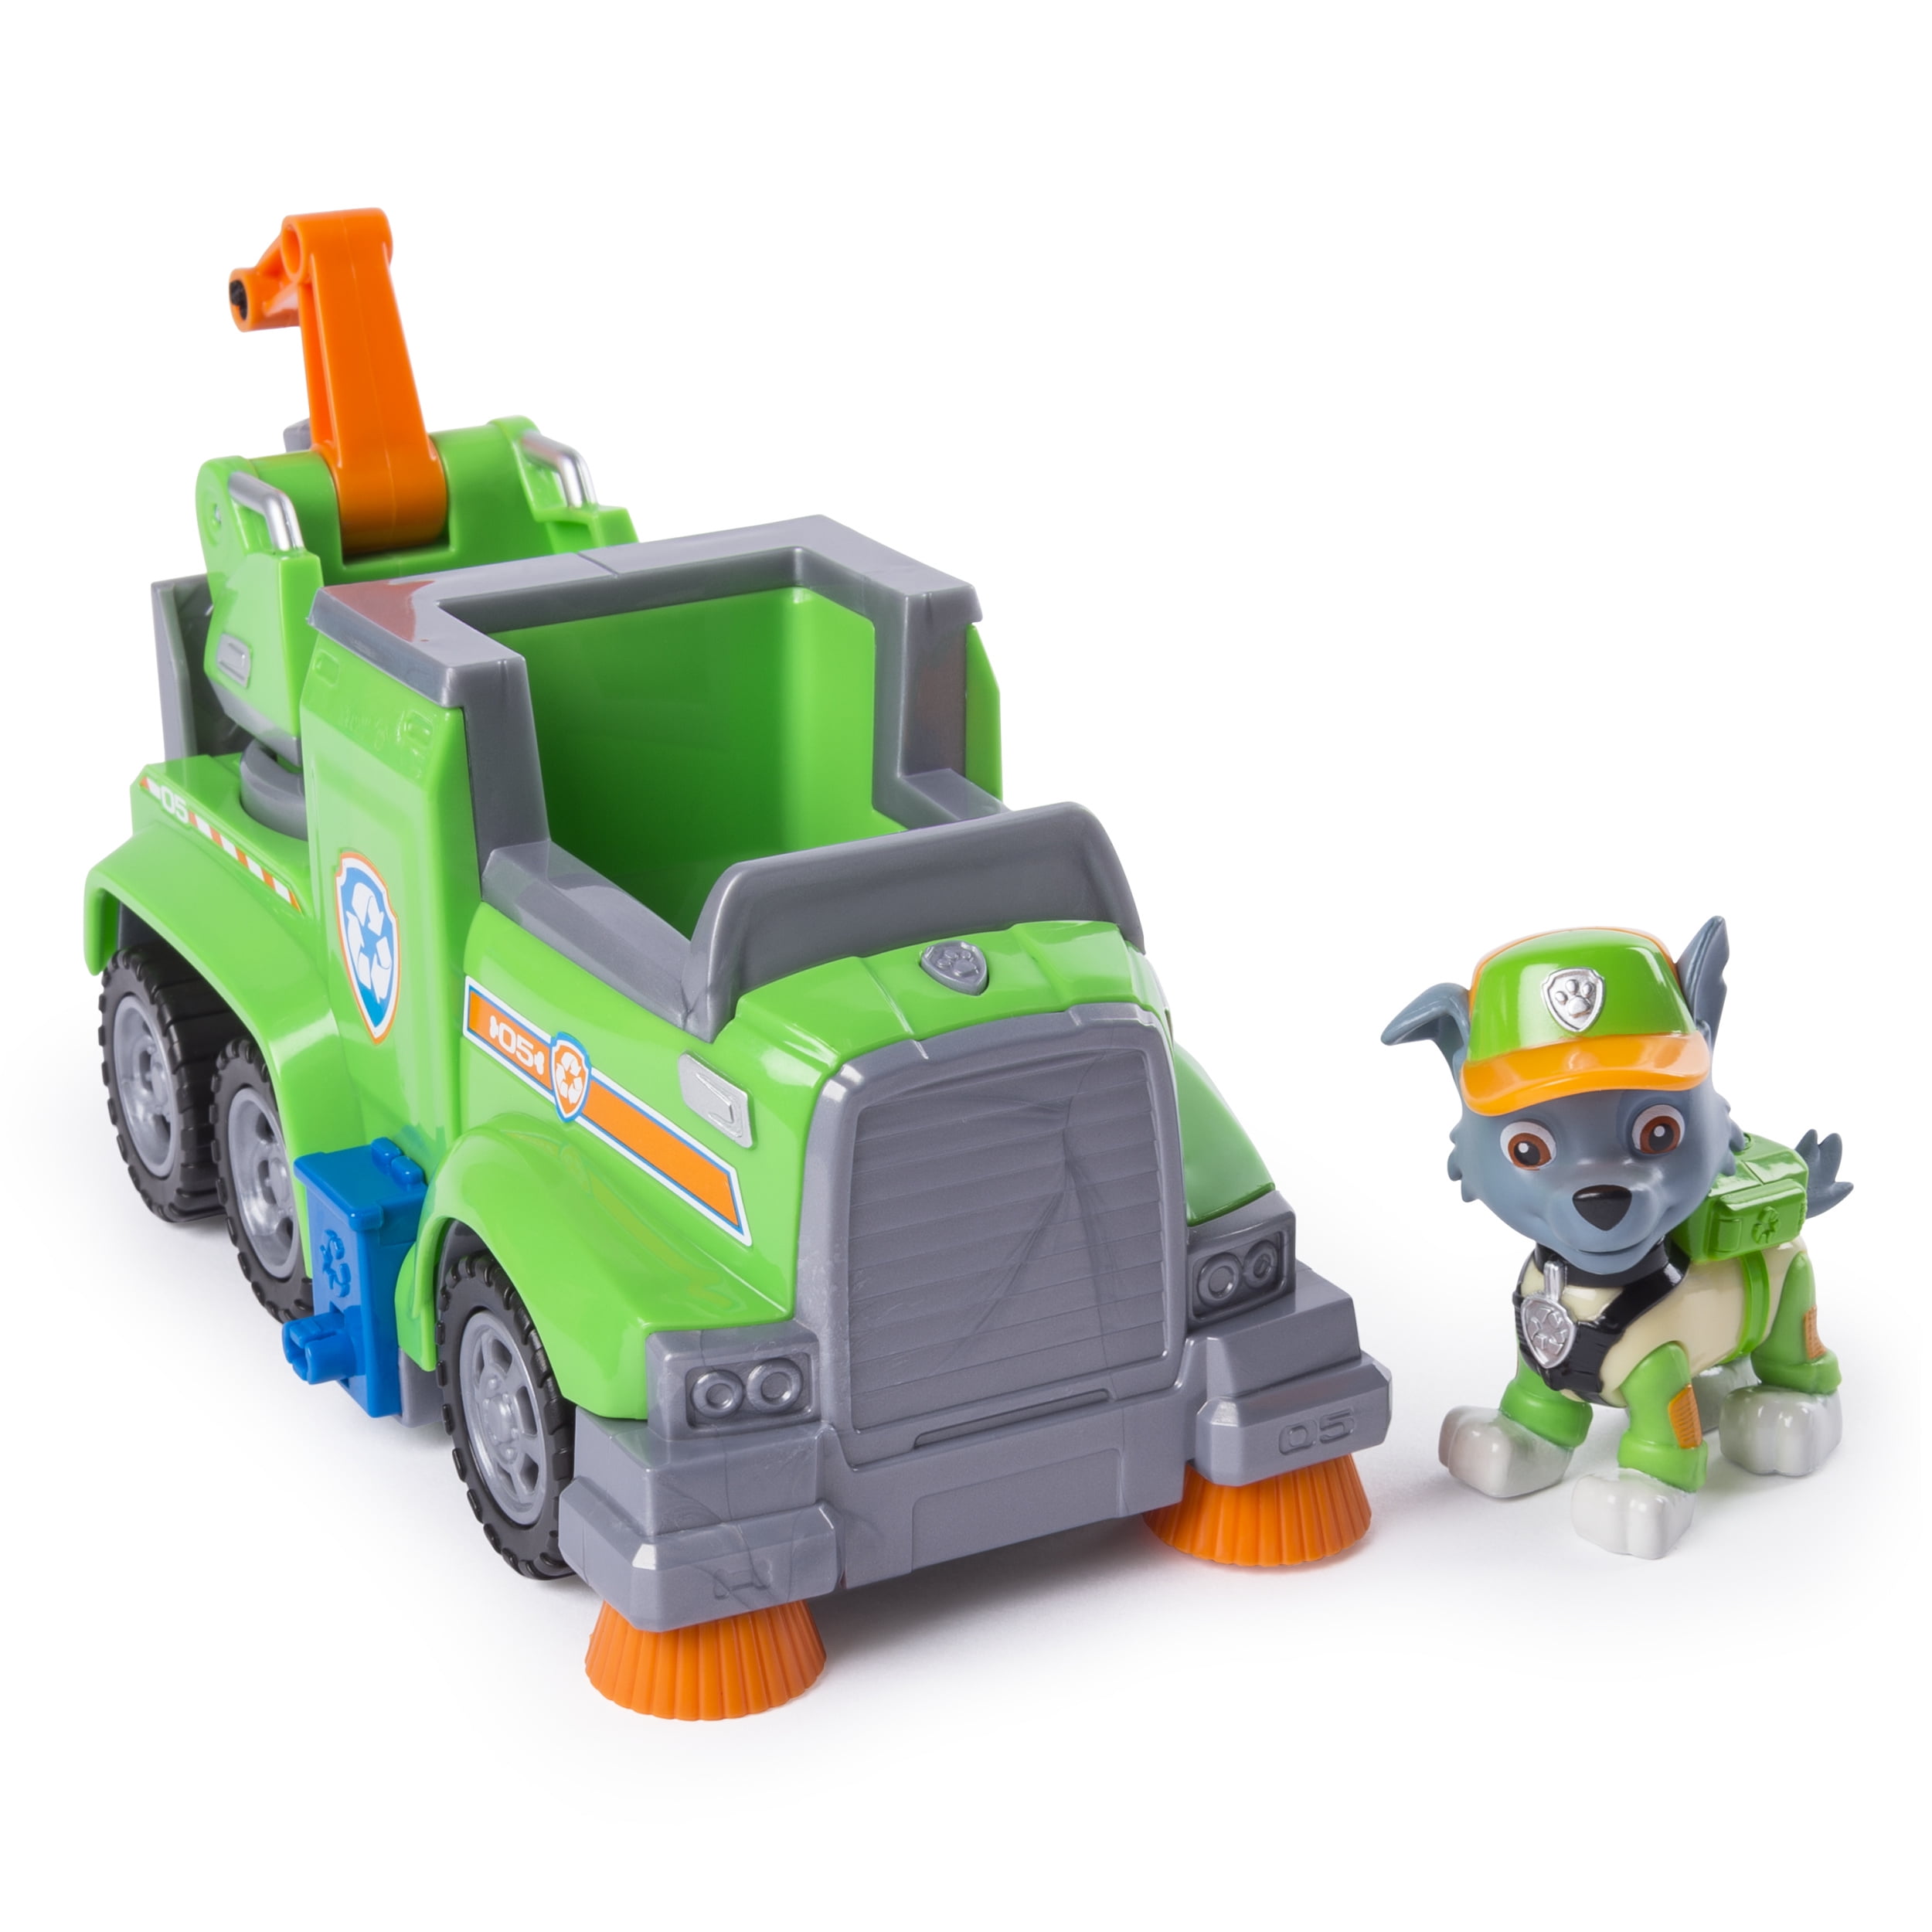 Paw patrol toy ultimate vehicle Themeveh Superpaw Rocky figures gbl 